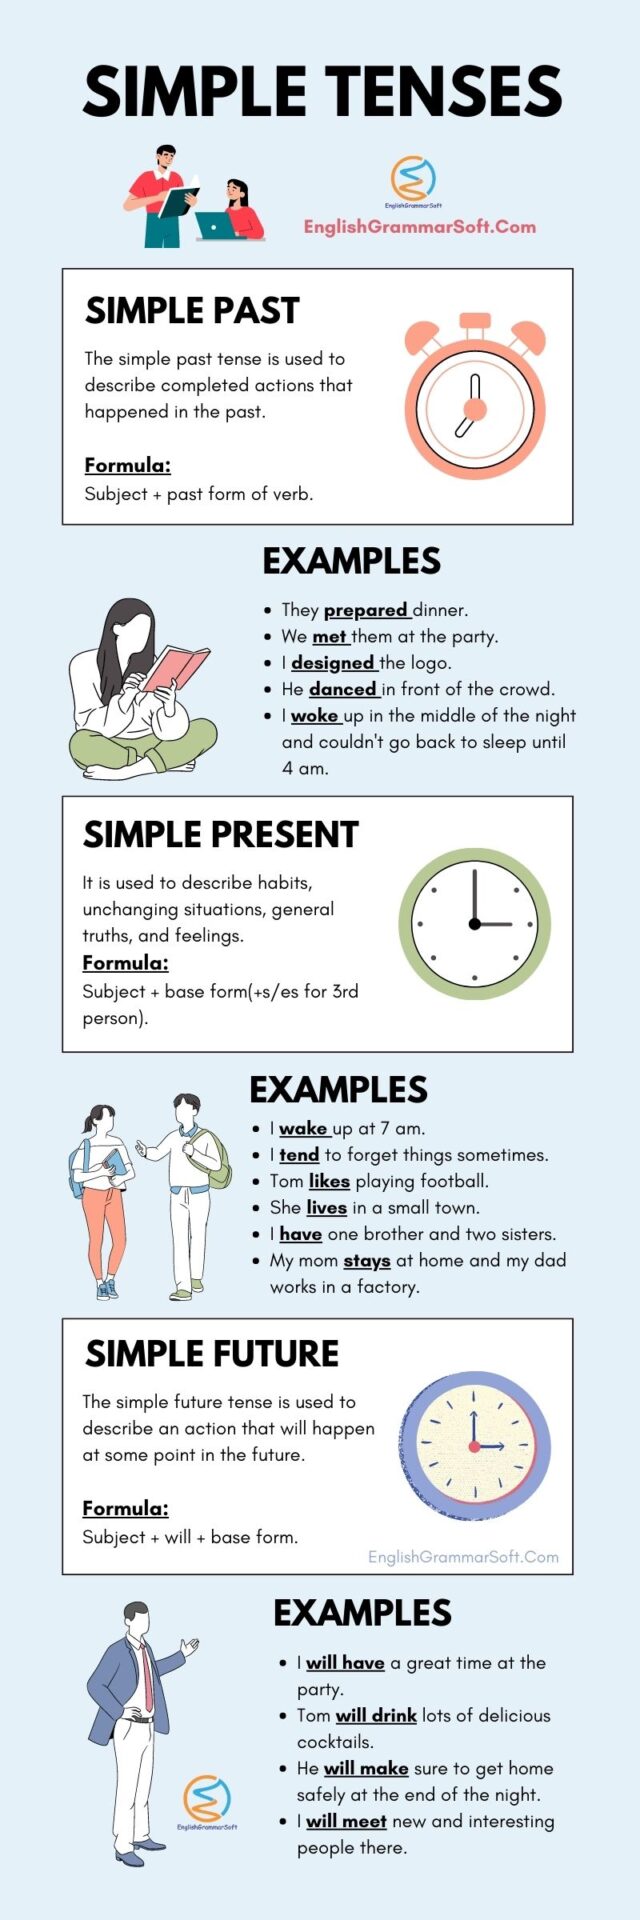 Simple Tenses with Examples